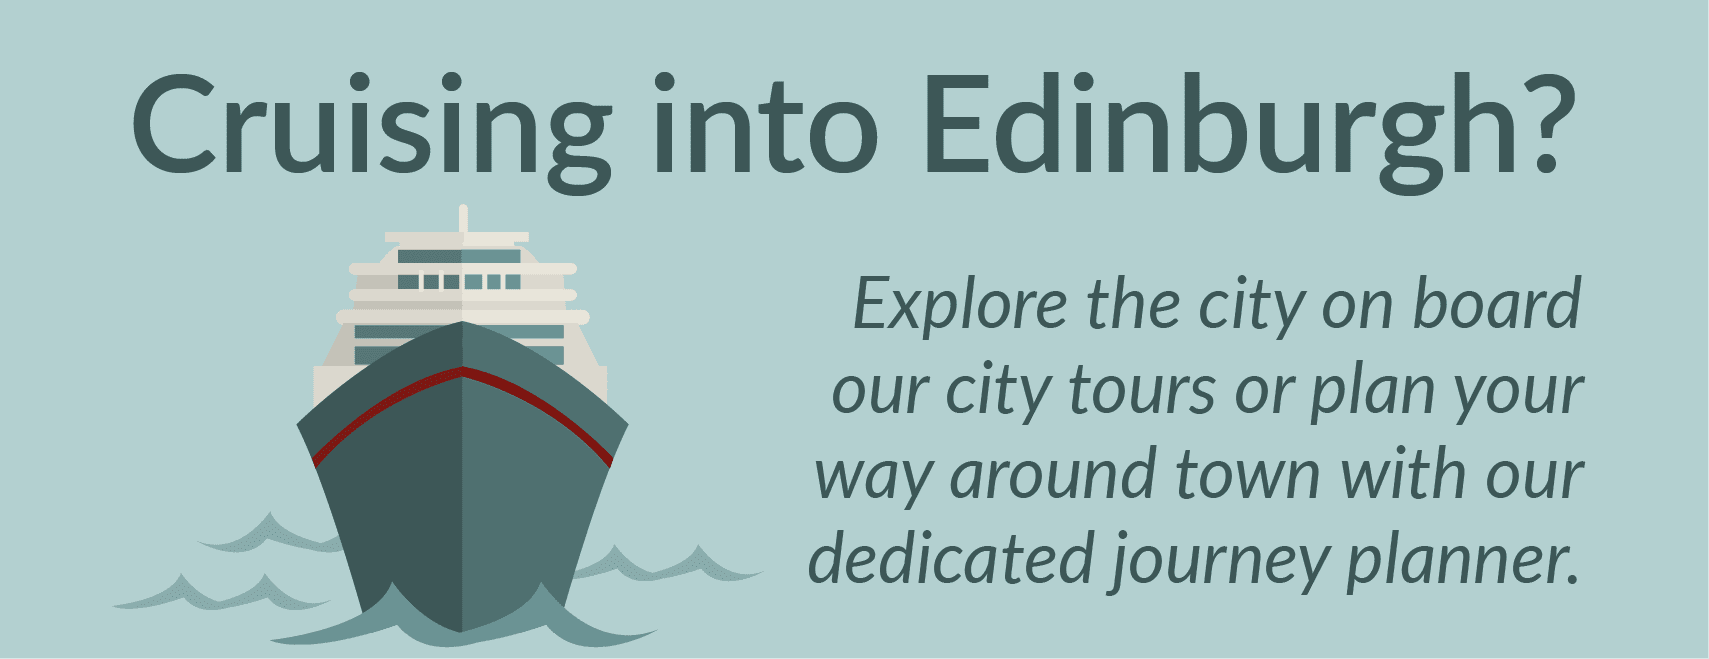 Cruising into Edinburgh? Click to find out more about bus services in the area.